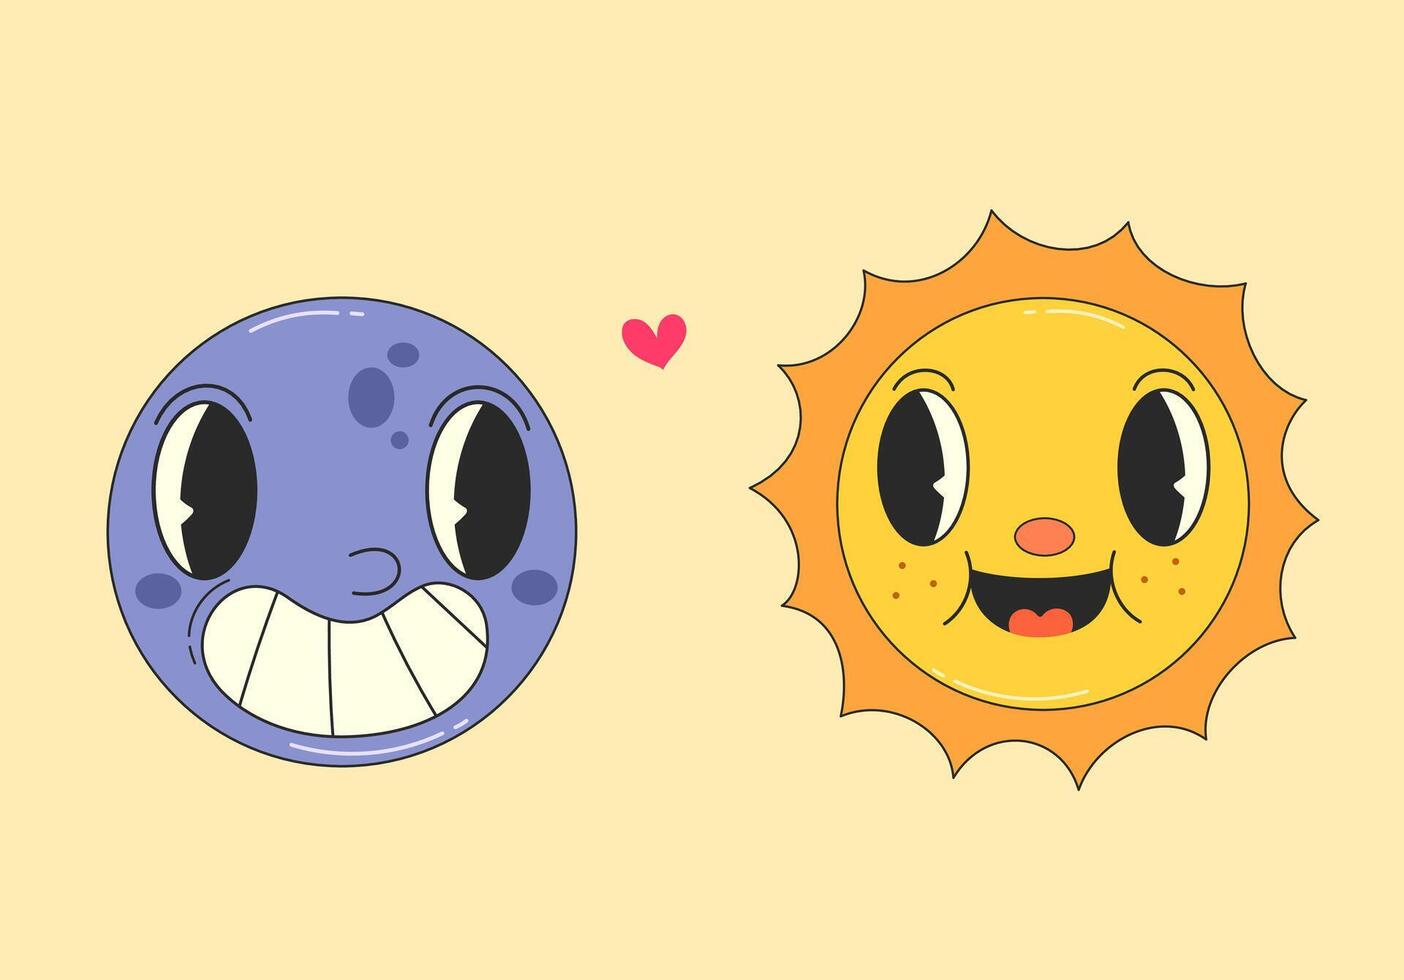 Colored vector illustration with smiling moon and talking sun in groovy style